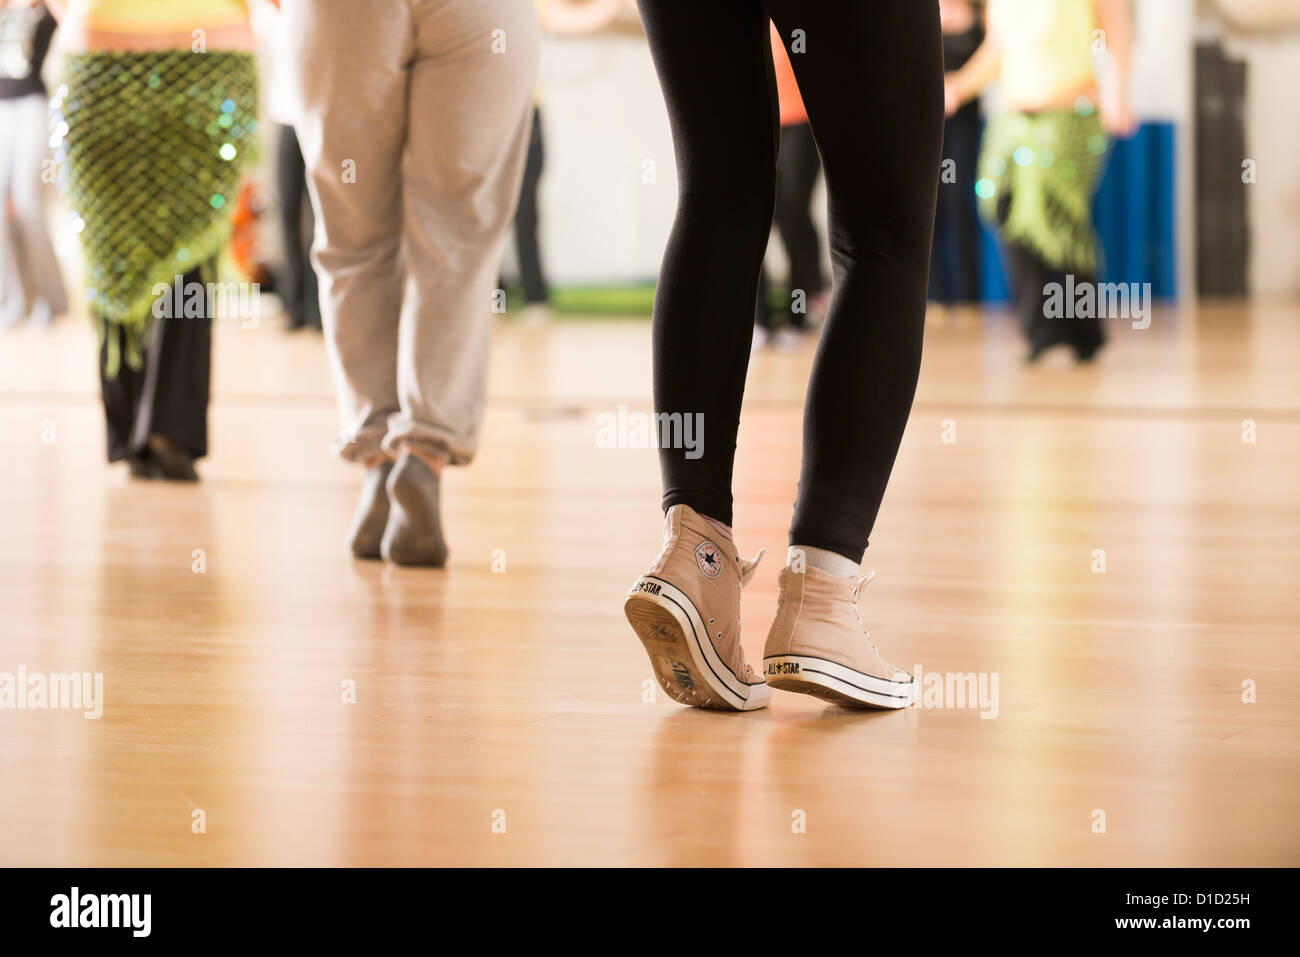 dance dancer dancing competition local club health wellness fitness gym studio woman sexy Stock Photo